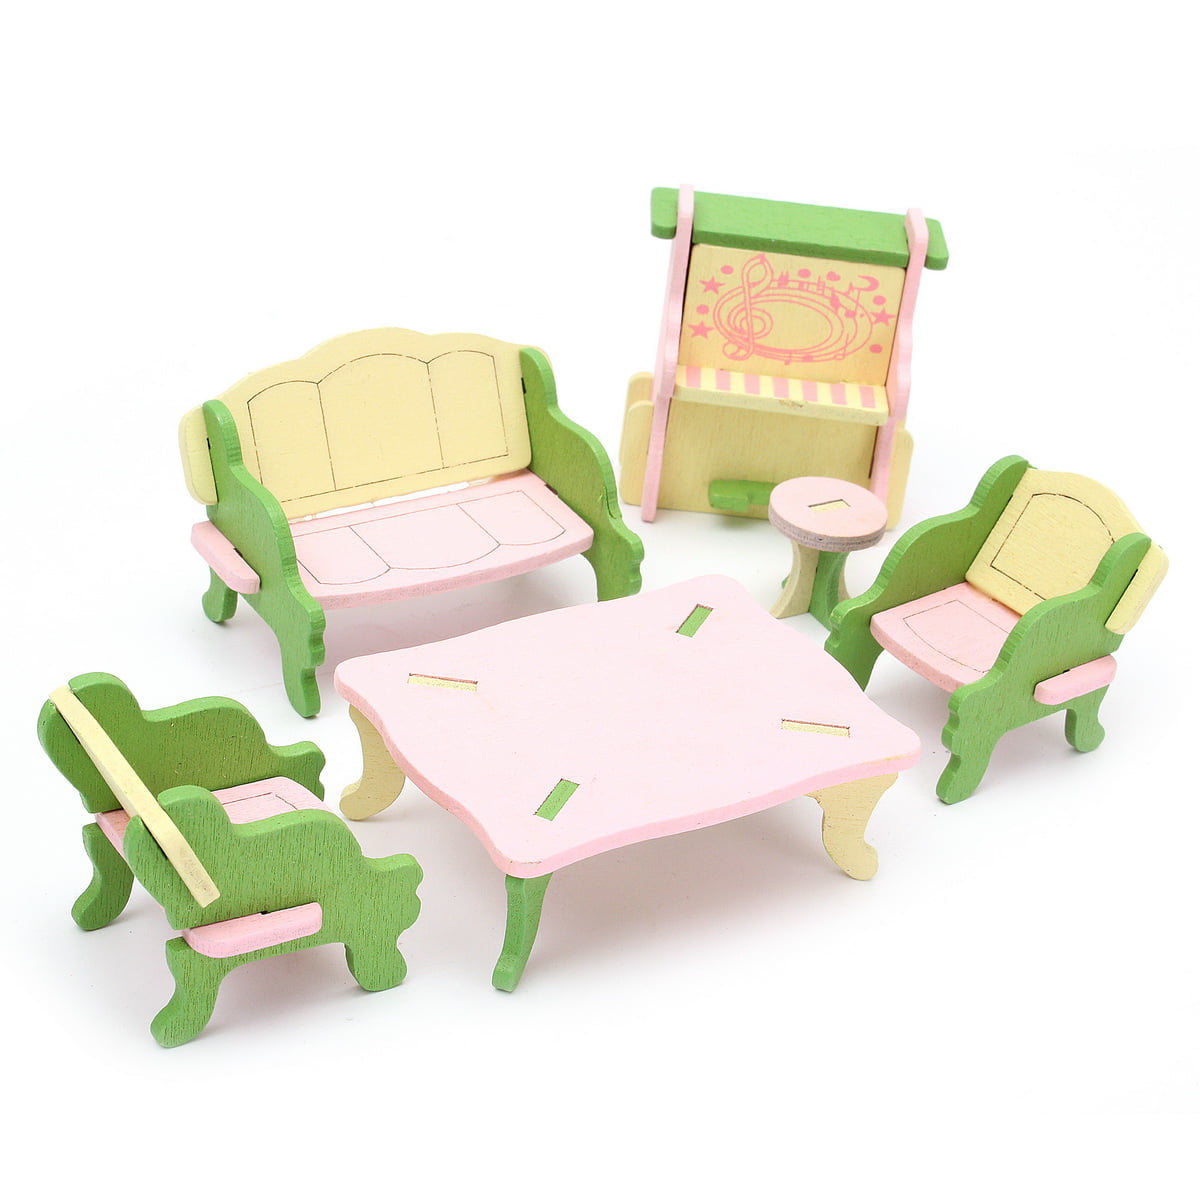 Wooden Furniture Set Doll House Miniature Room Accessories Kids Pretend Play Toy 